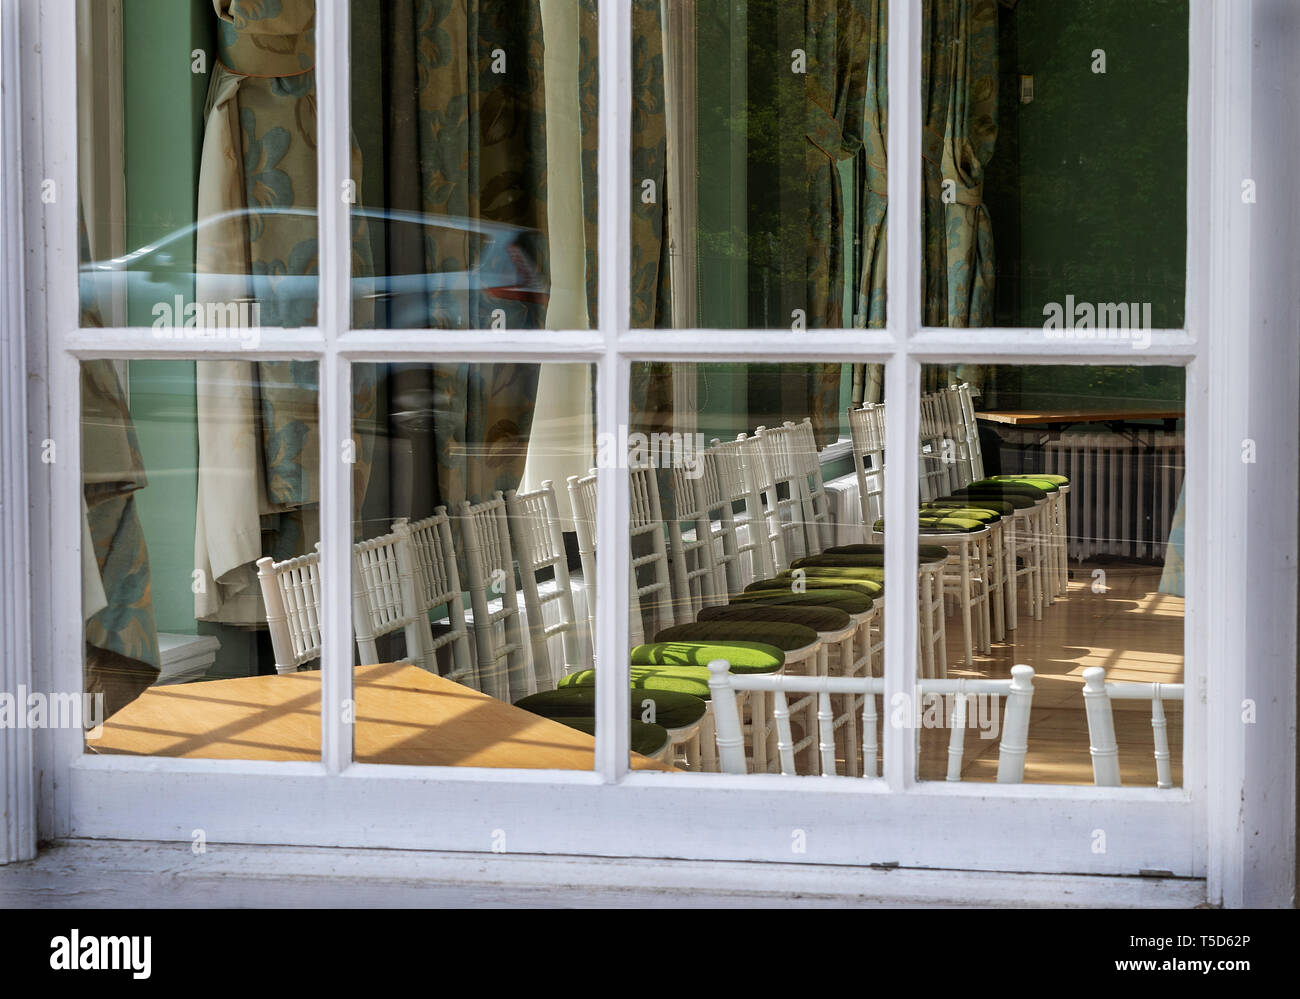 A view through a window  into the assembly rooms in Royal Lemington Spa showing empty chairs with an atmosphere of sadness Stock Photo